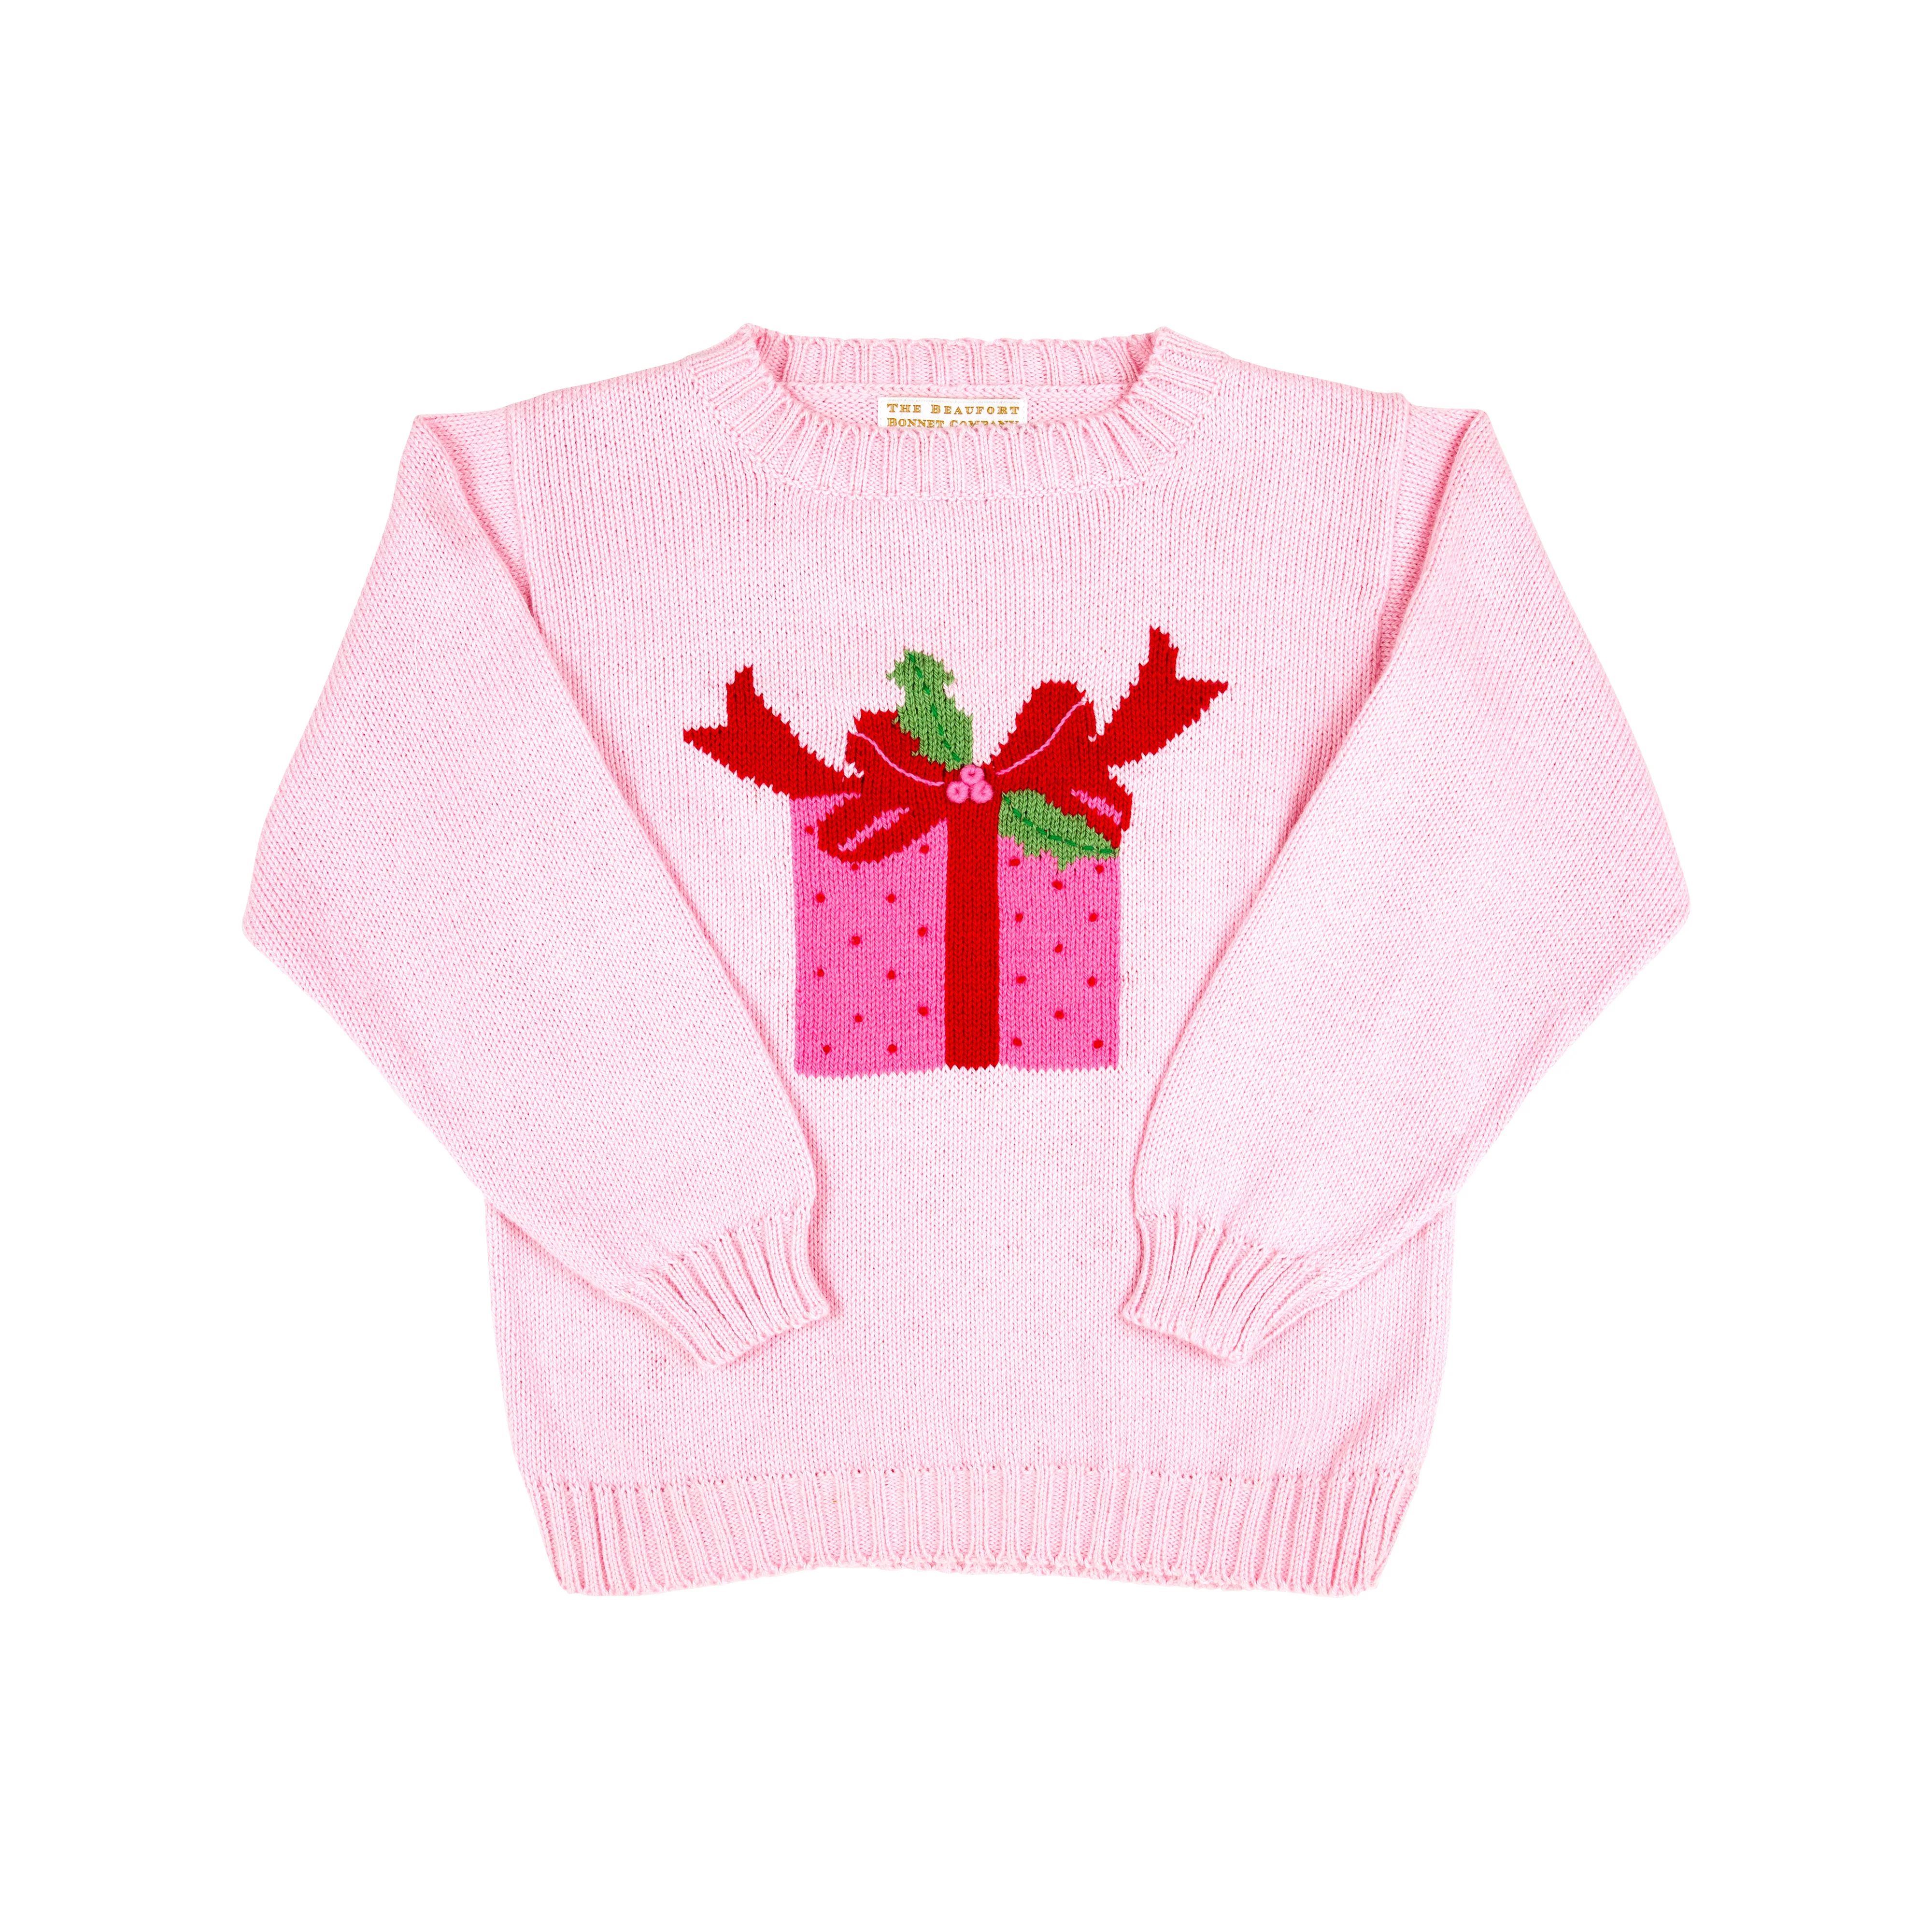 Isabelle's Intarsia Sweater - Palm Beach Pink with Gift Intarsia | The Beaufort Bonnet Company